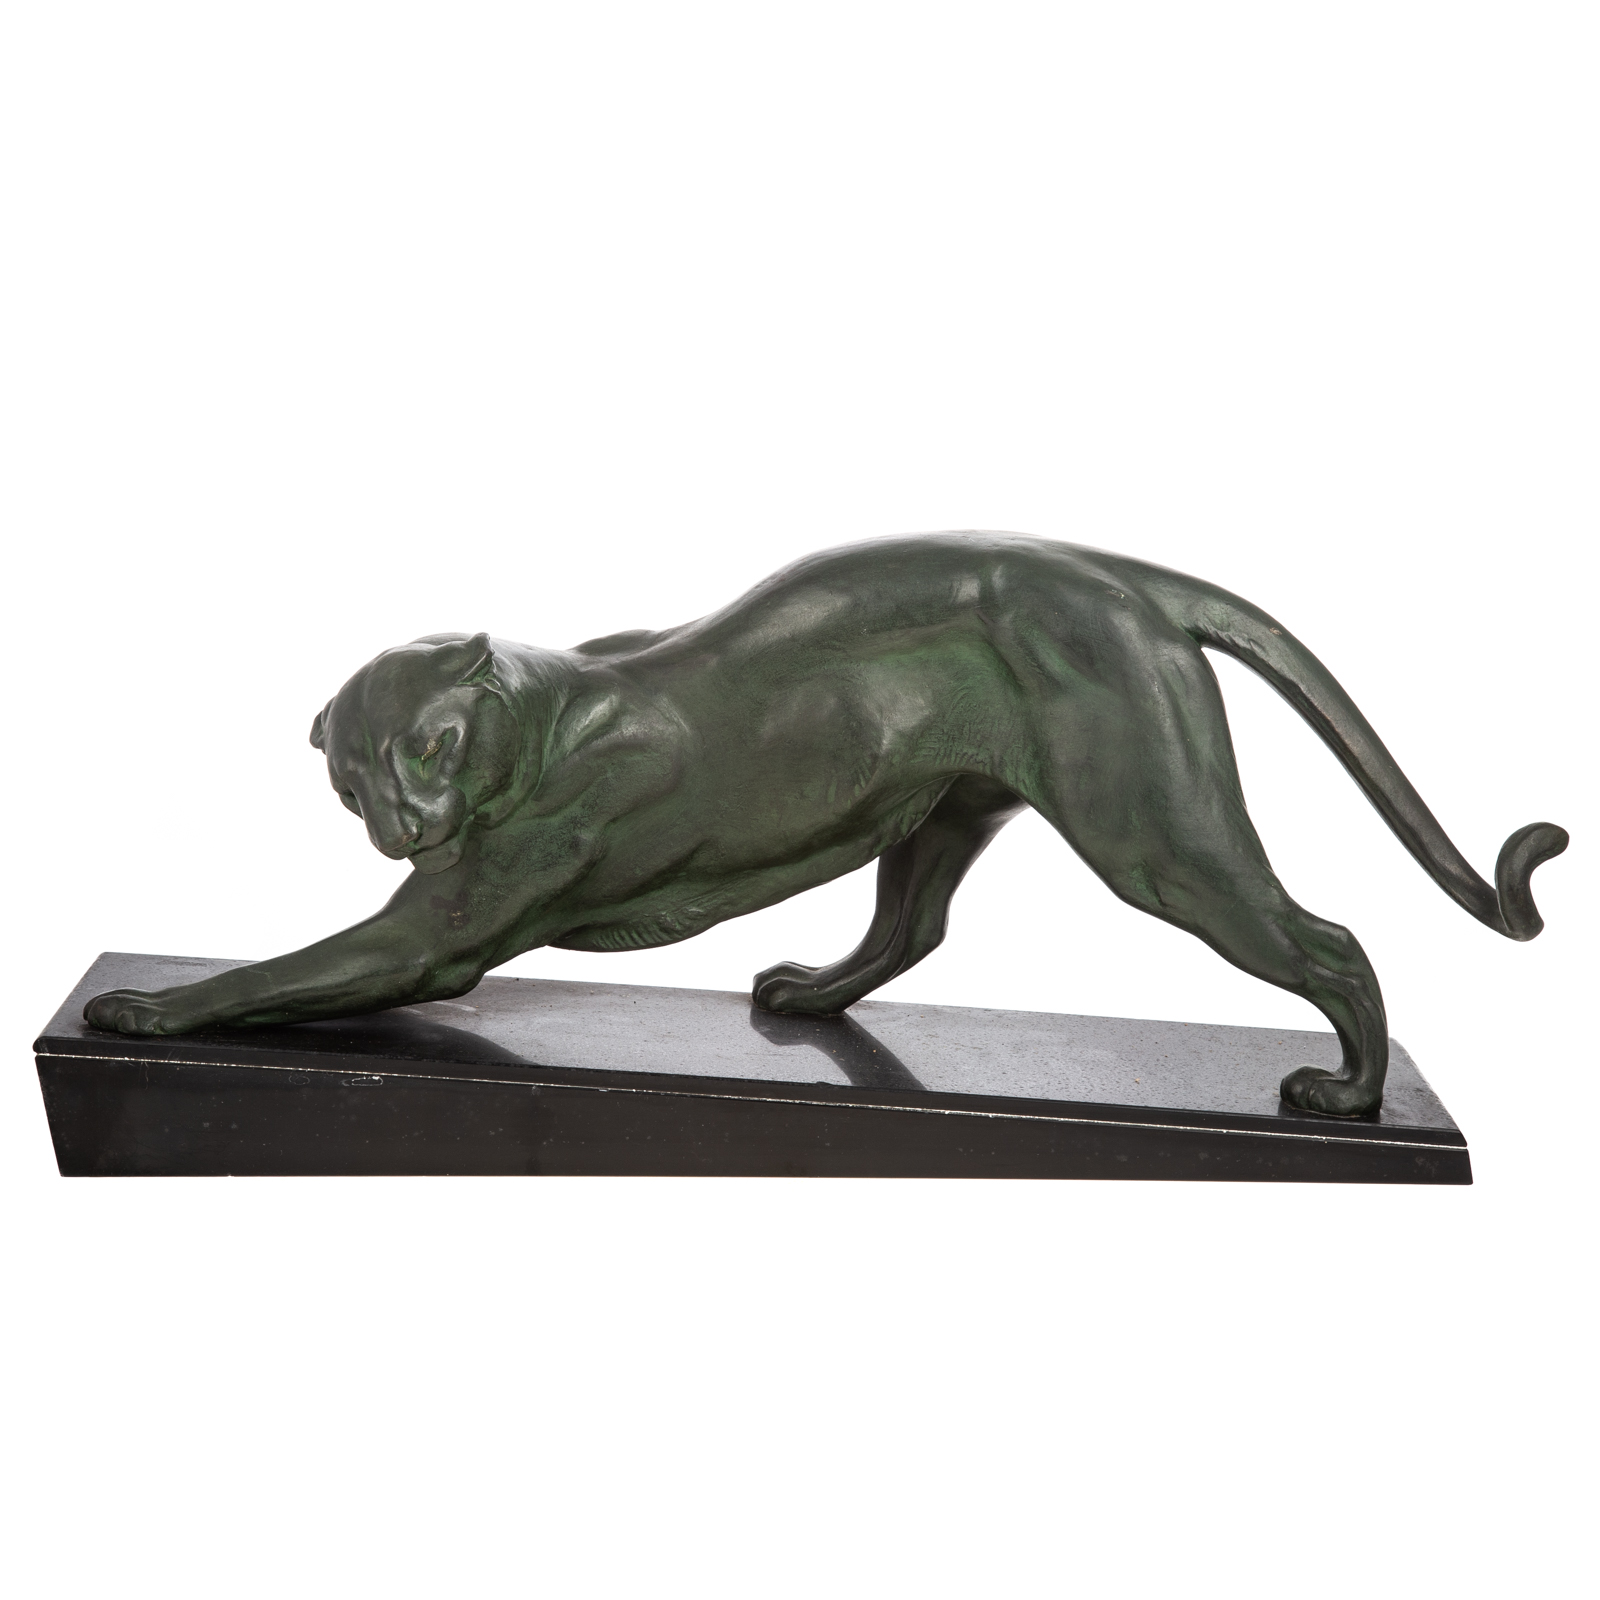 PLAGNET PROWLING PANTHER SPELTER 369516